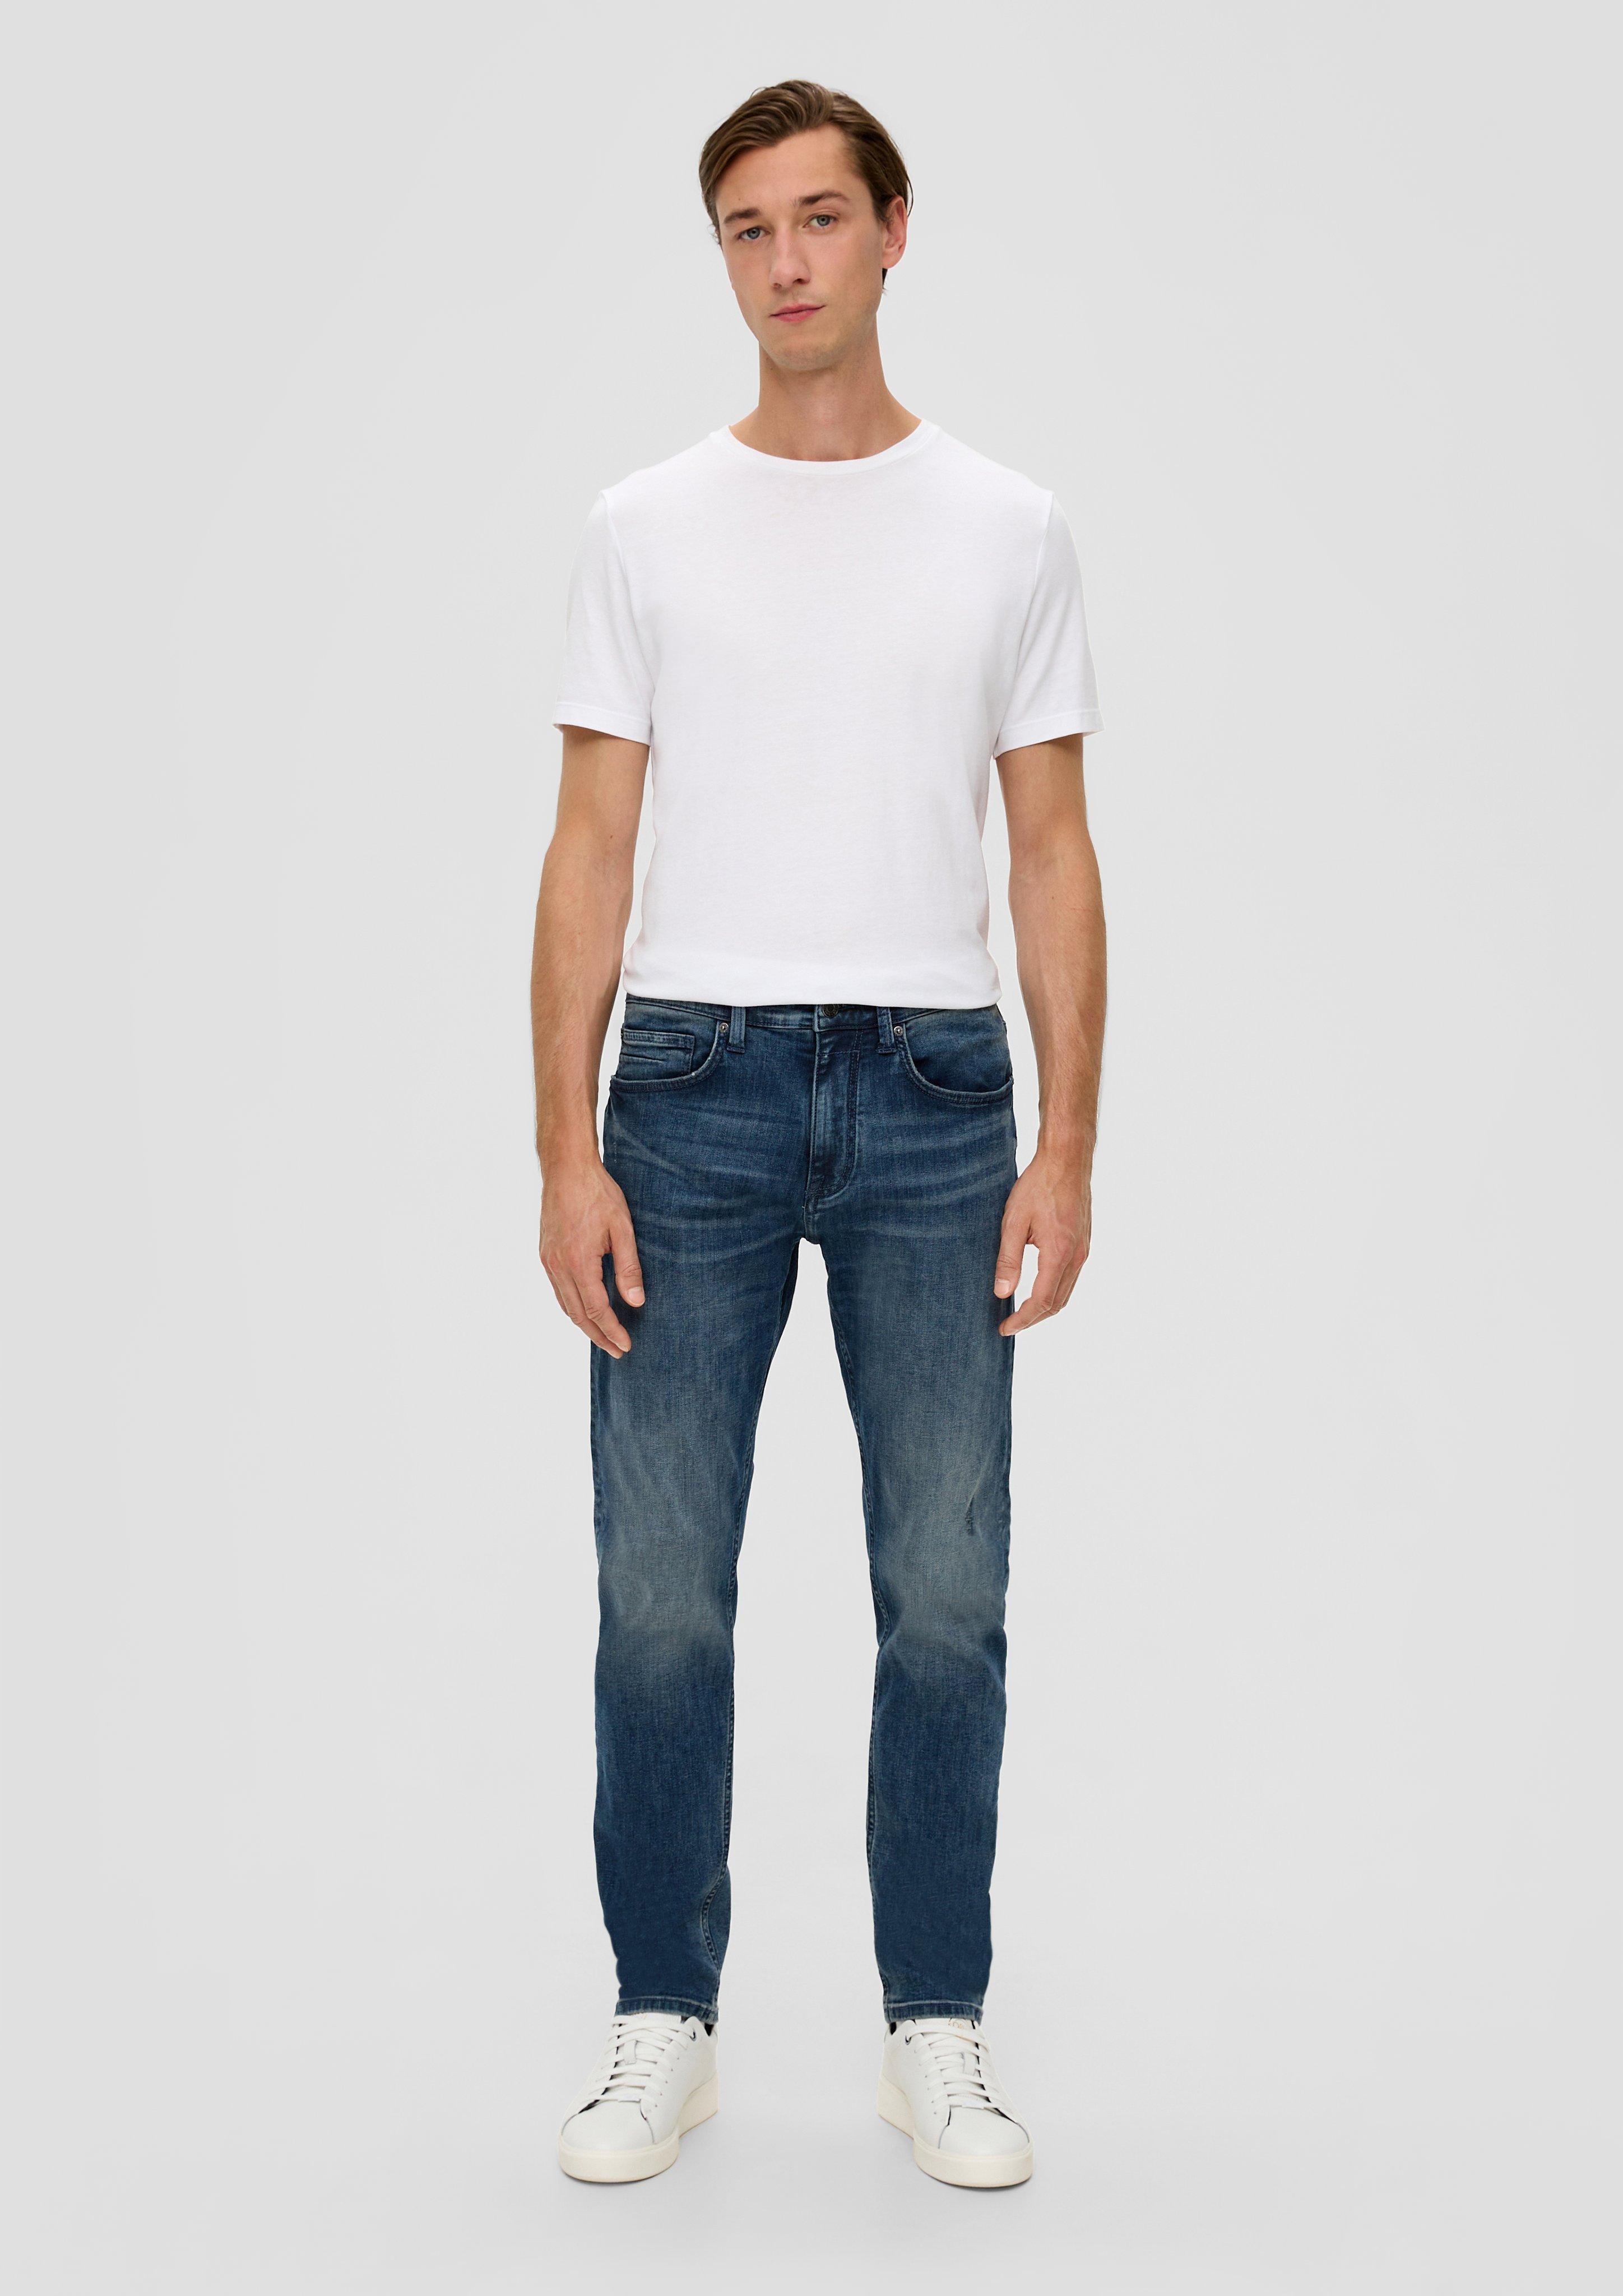 Jeans / Mid Fit Regular deep / / 5-Pocket Tapered / - Rise blue Leg Style